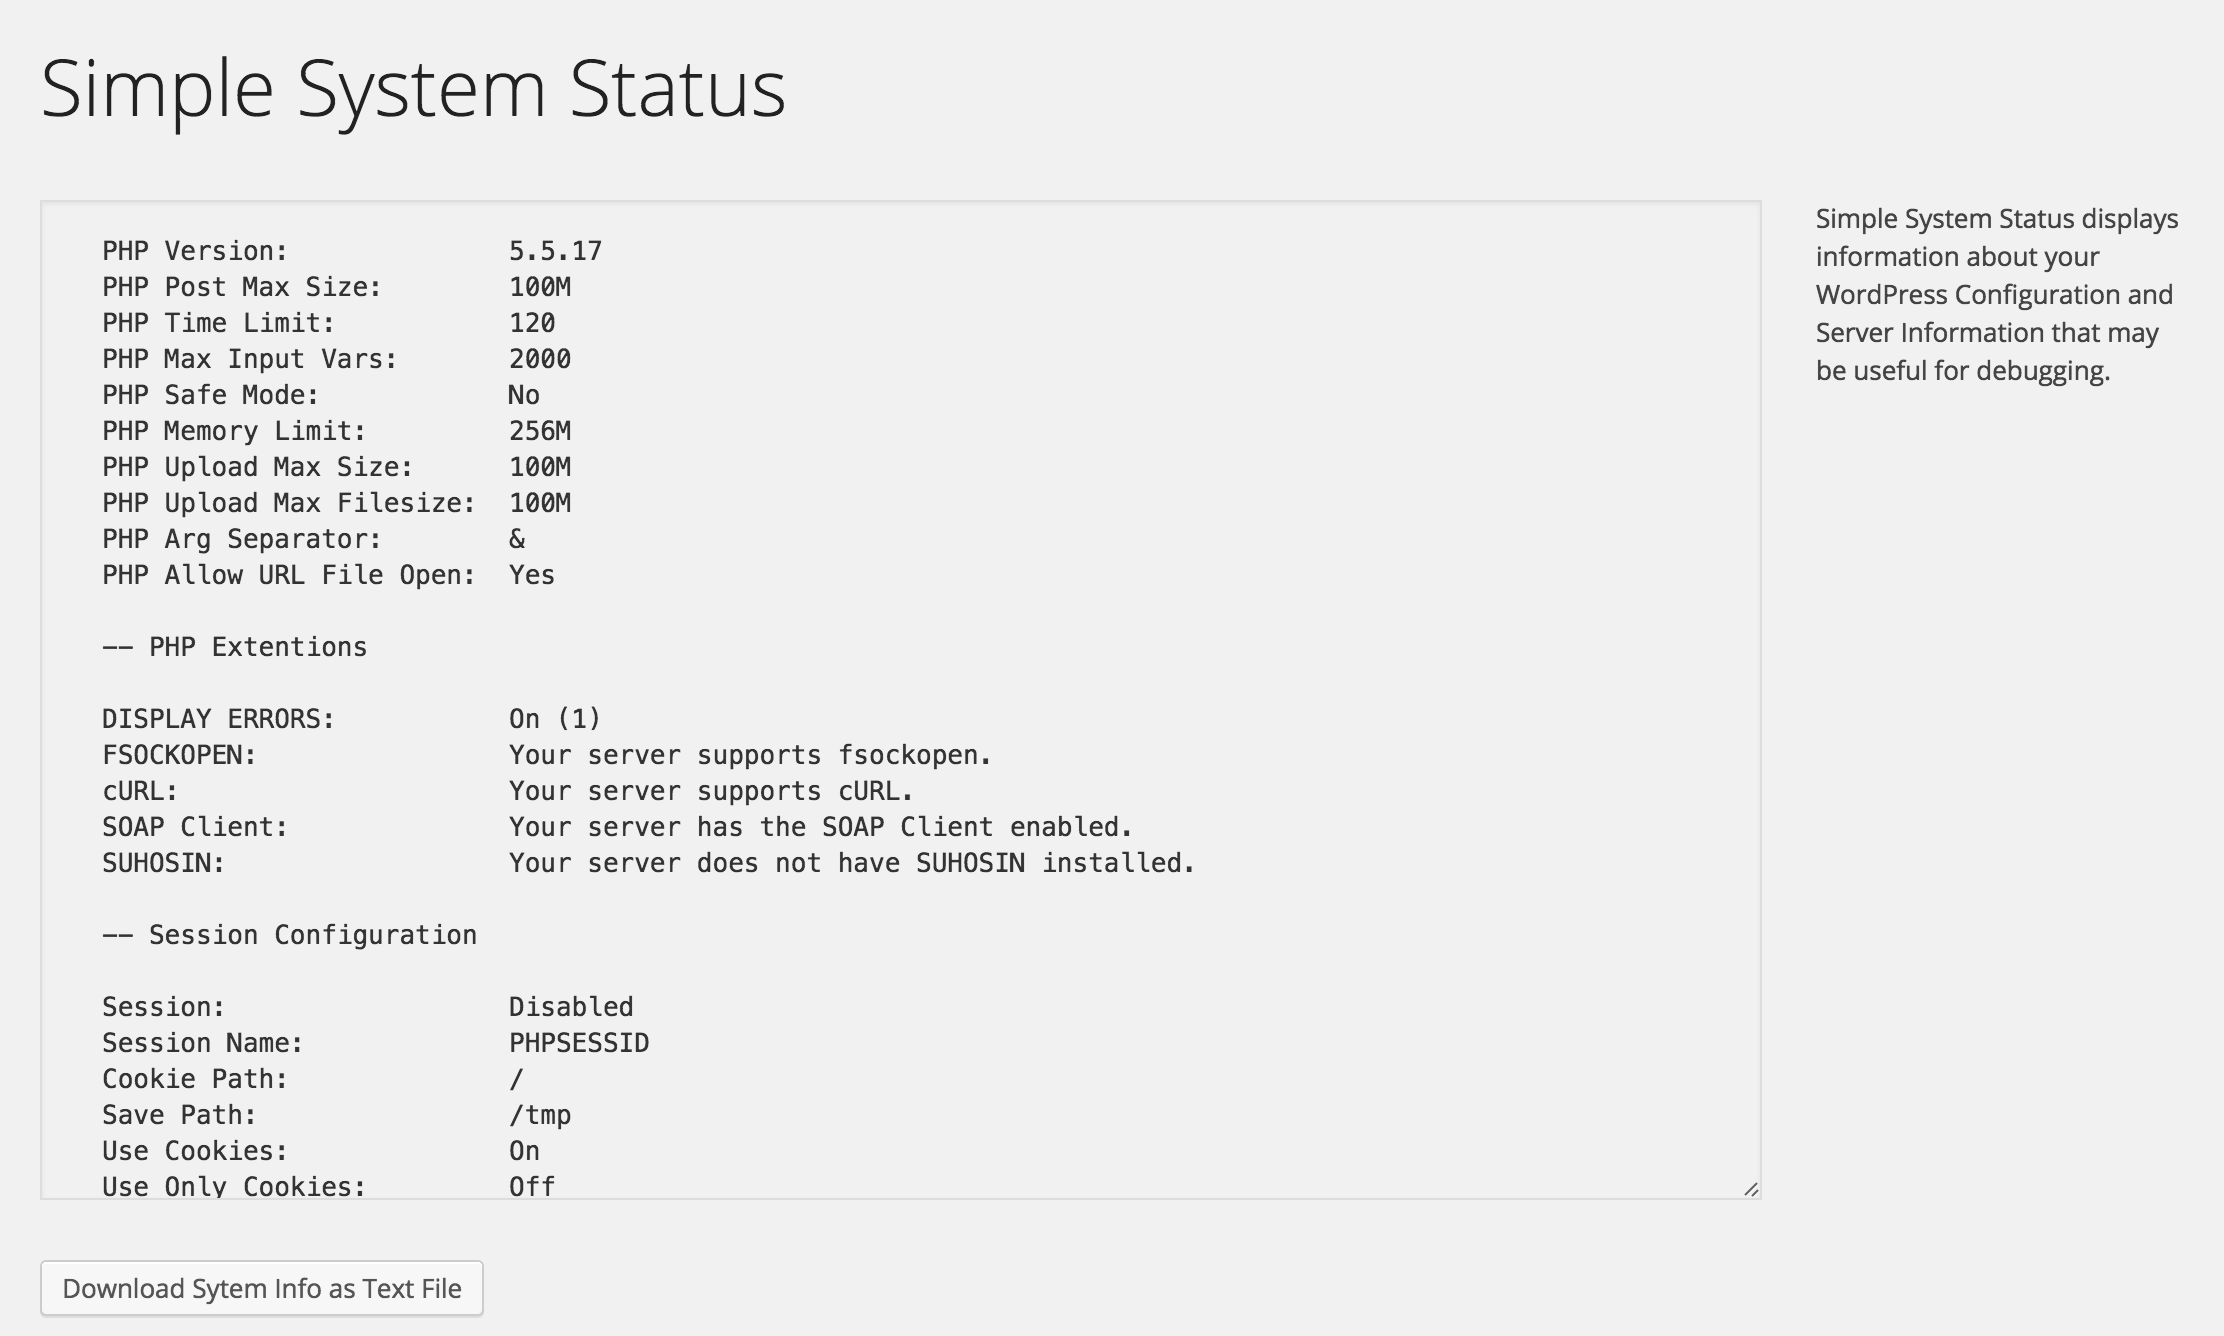 The Main Screen for viewing System Status, with download link (textfile)